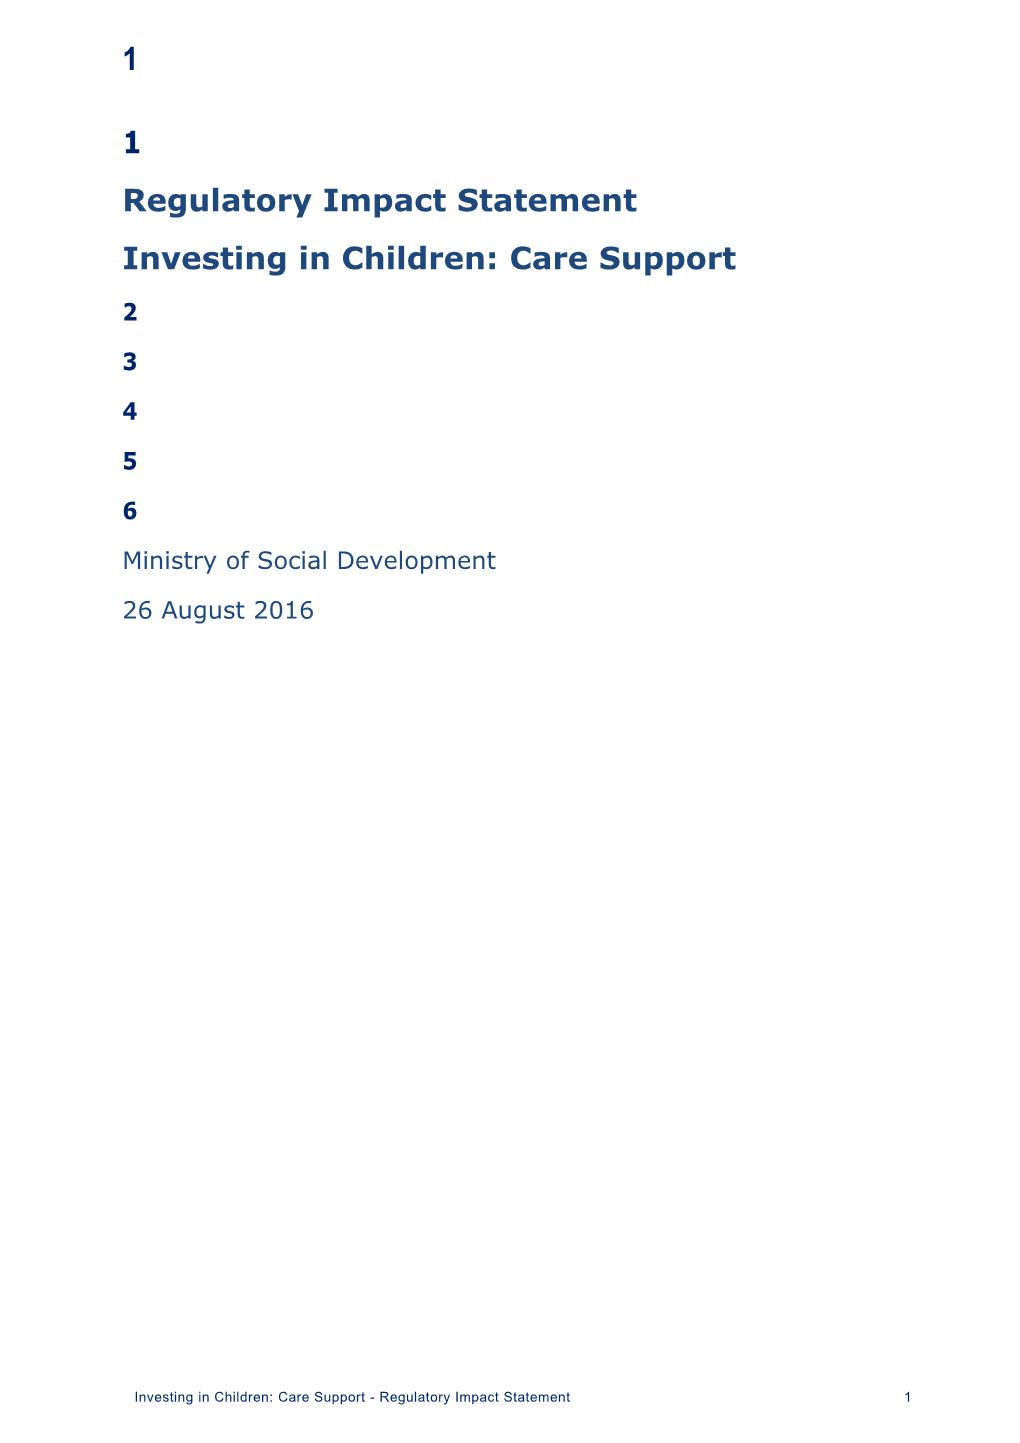 Investing in Children: Care Support